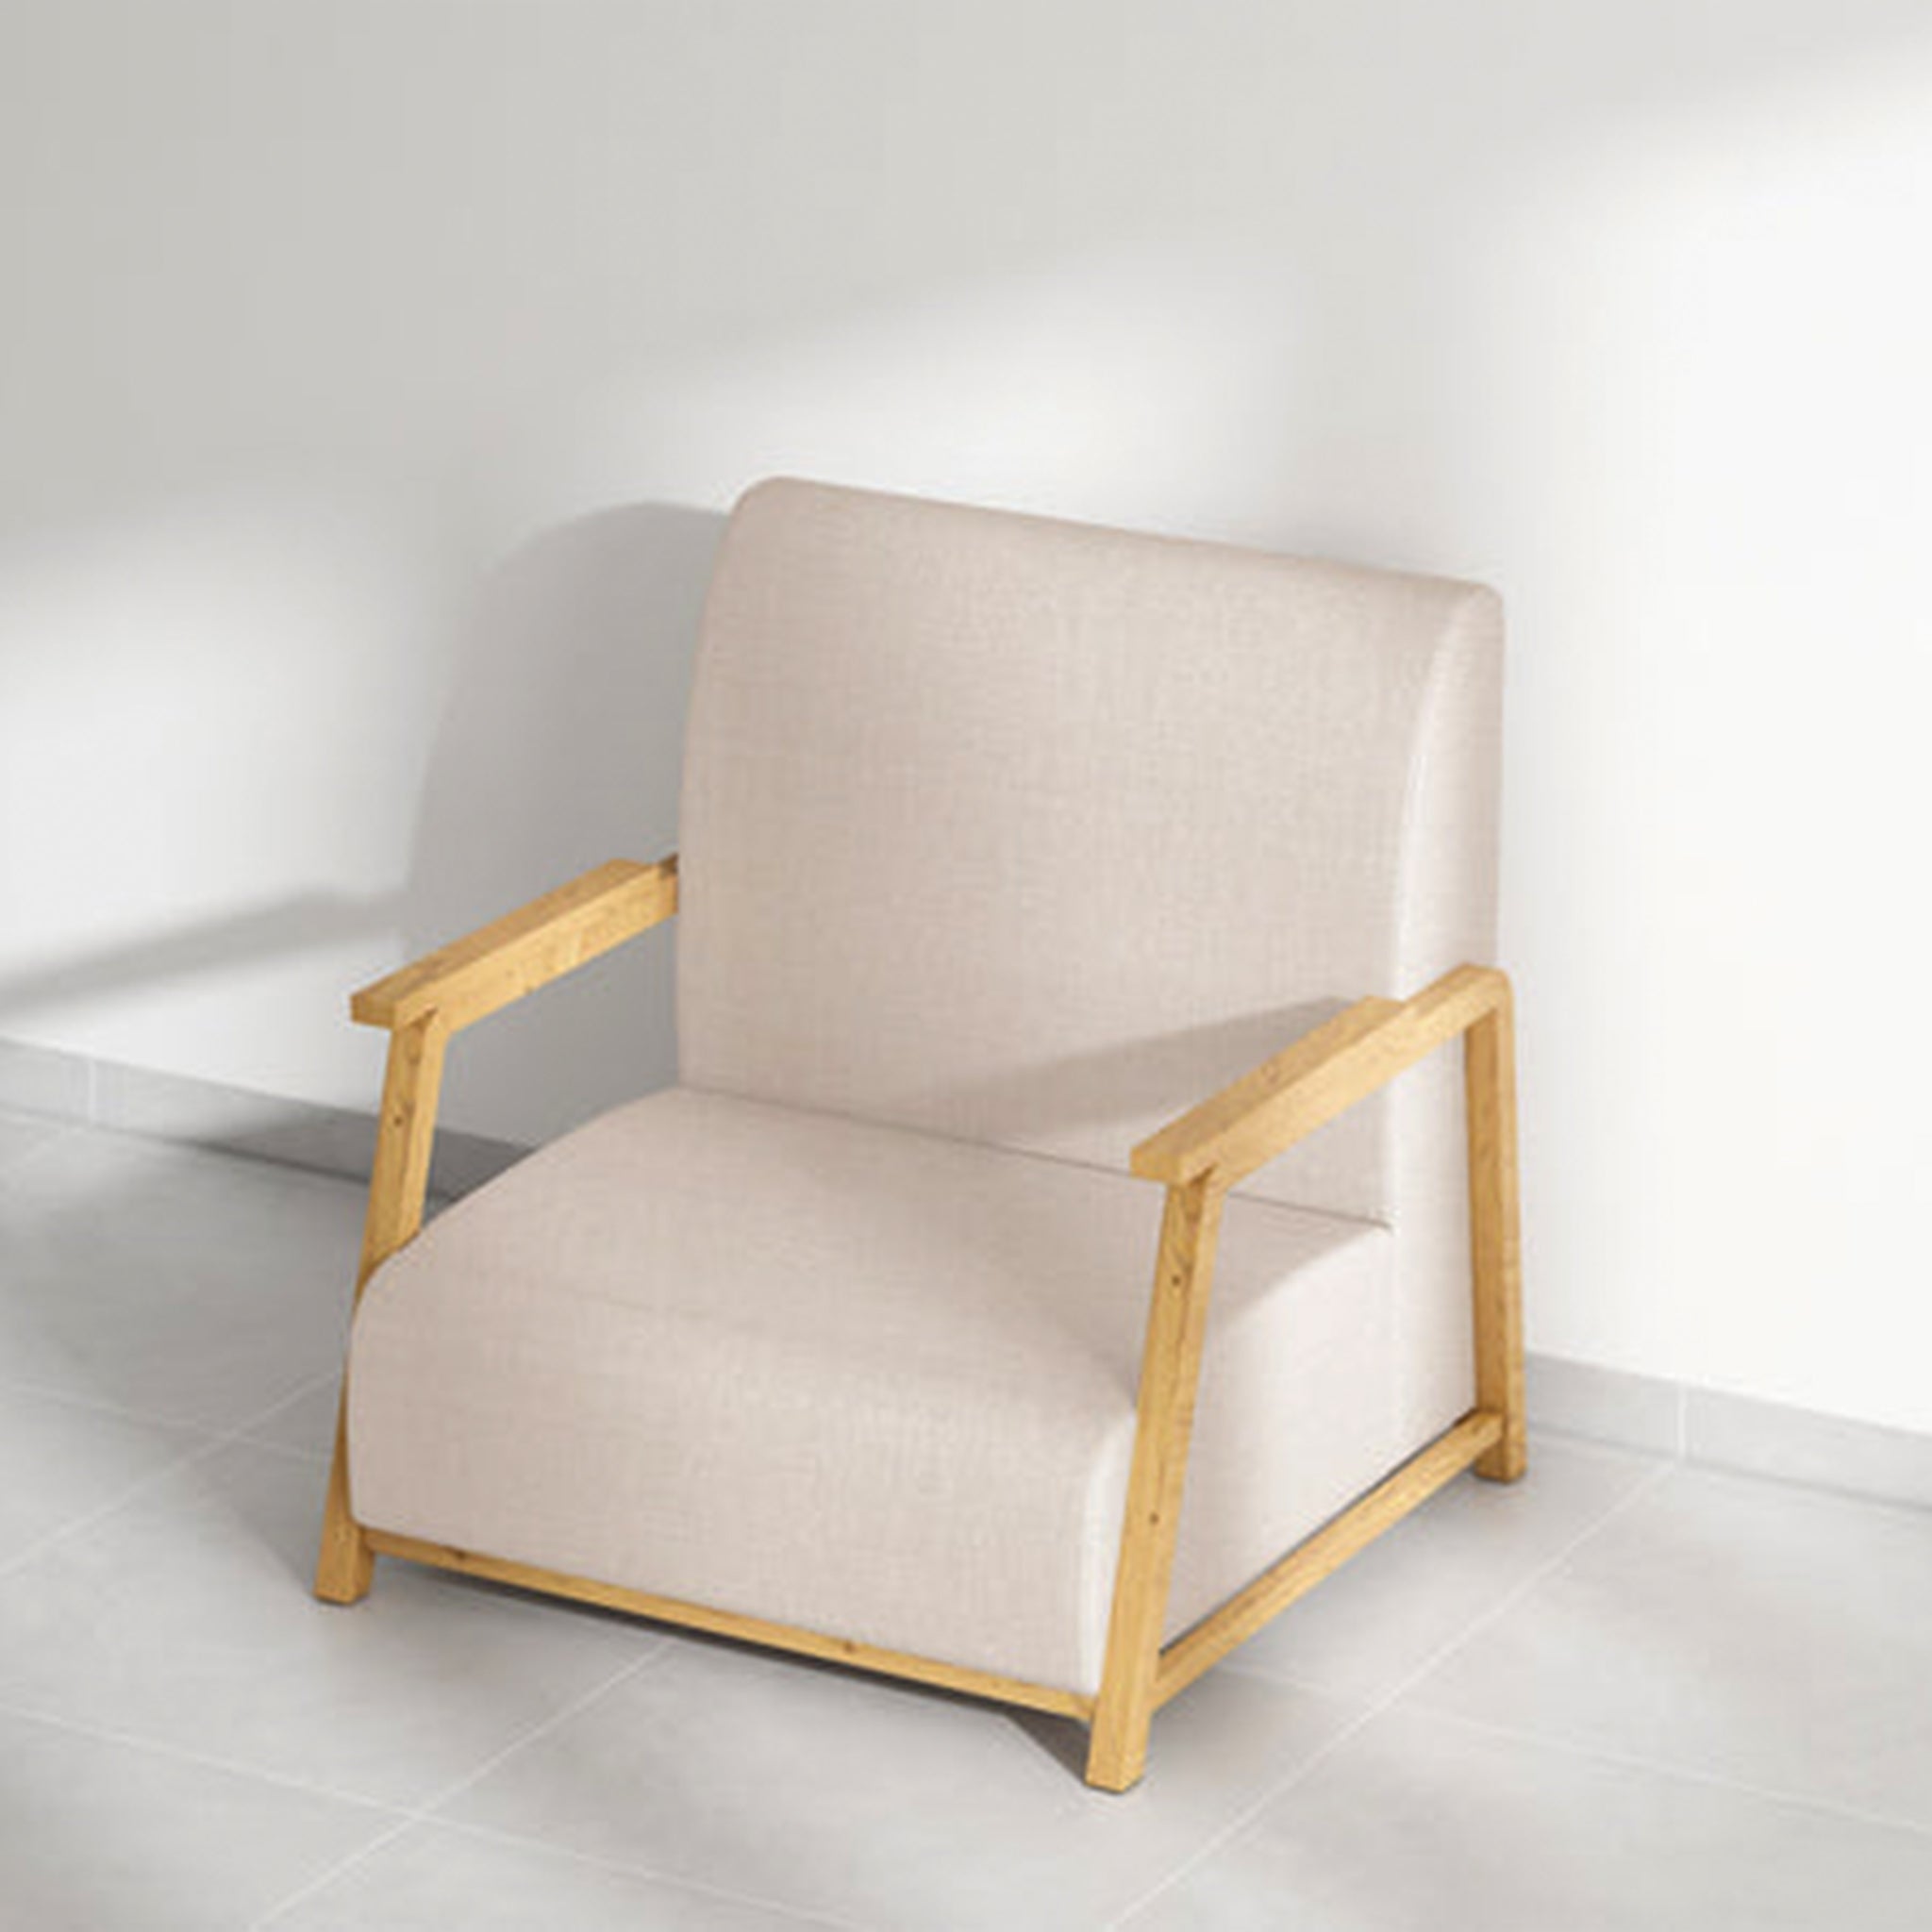 Angled top view of The Dixon Arm Accent Chair, highlighting its beige upholstery and robust natural wooden armrests, set against a minimalist background.